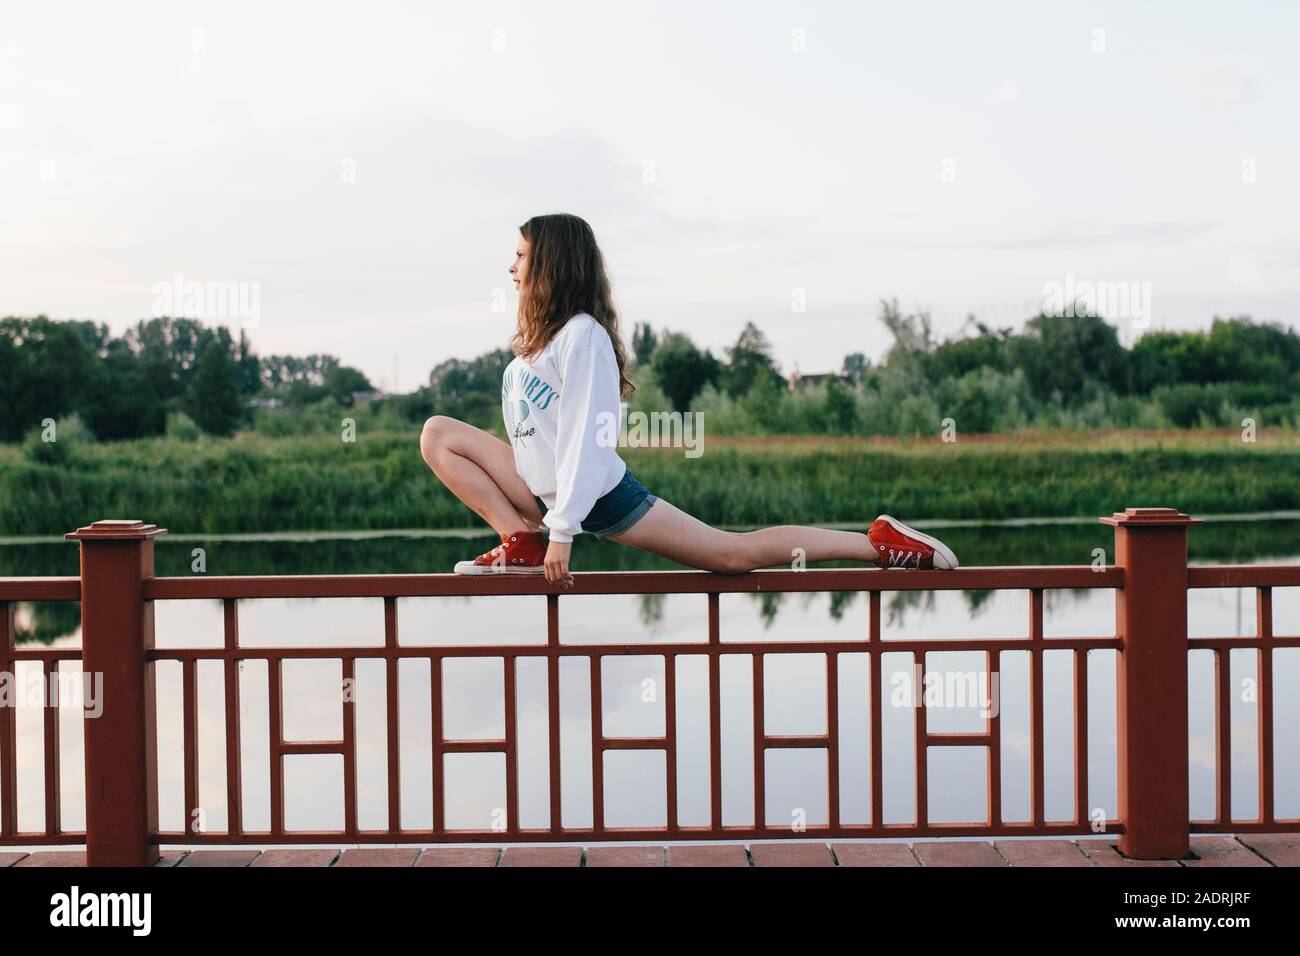 woman stretches her legs on a fence by the river Stock Photo